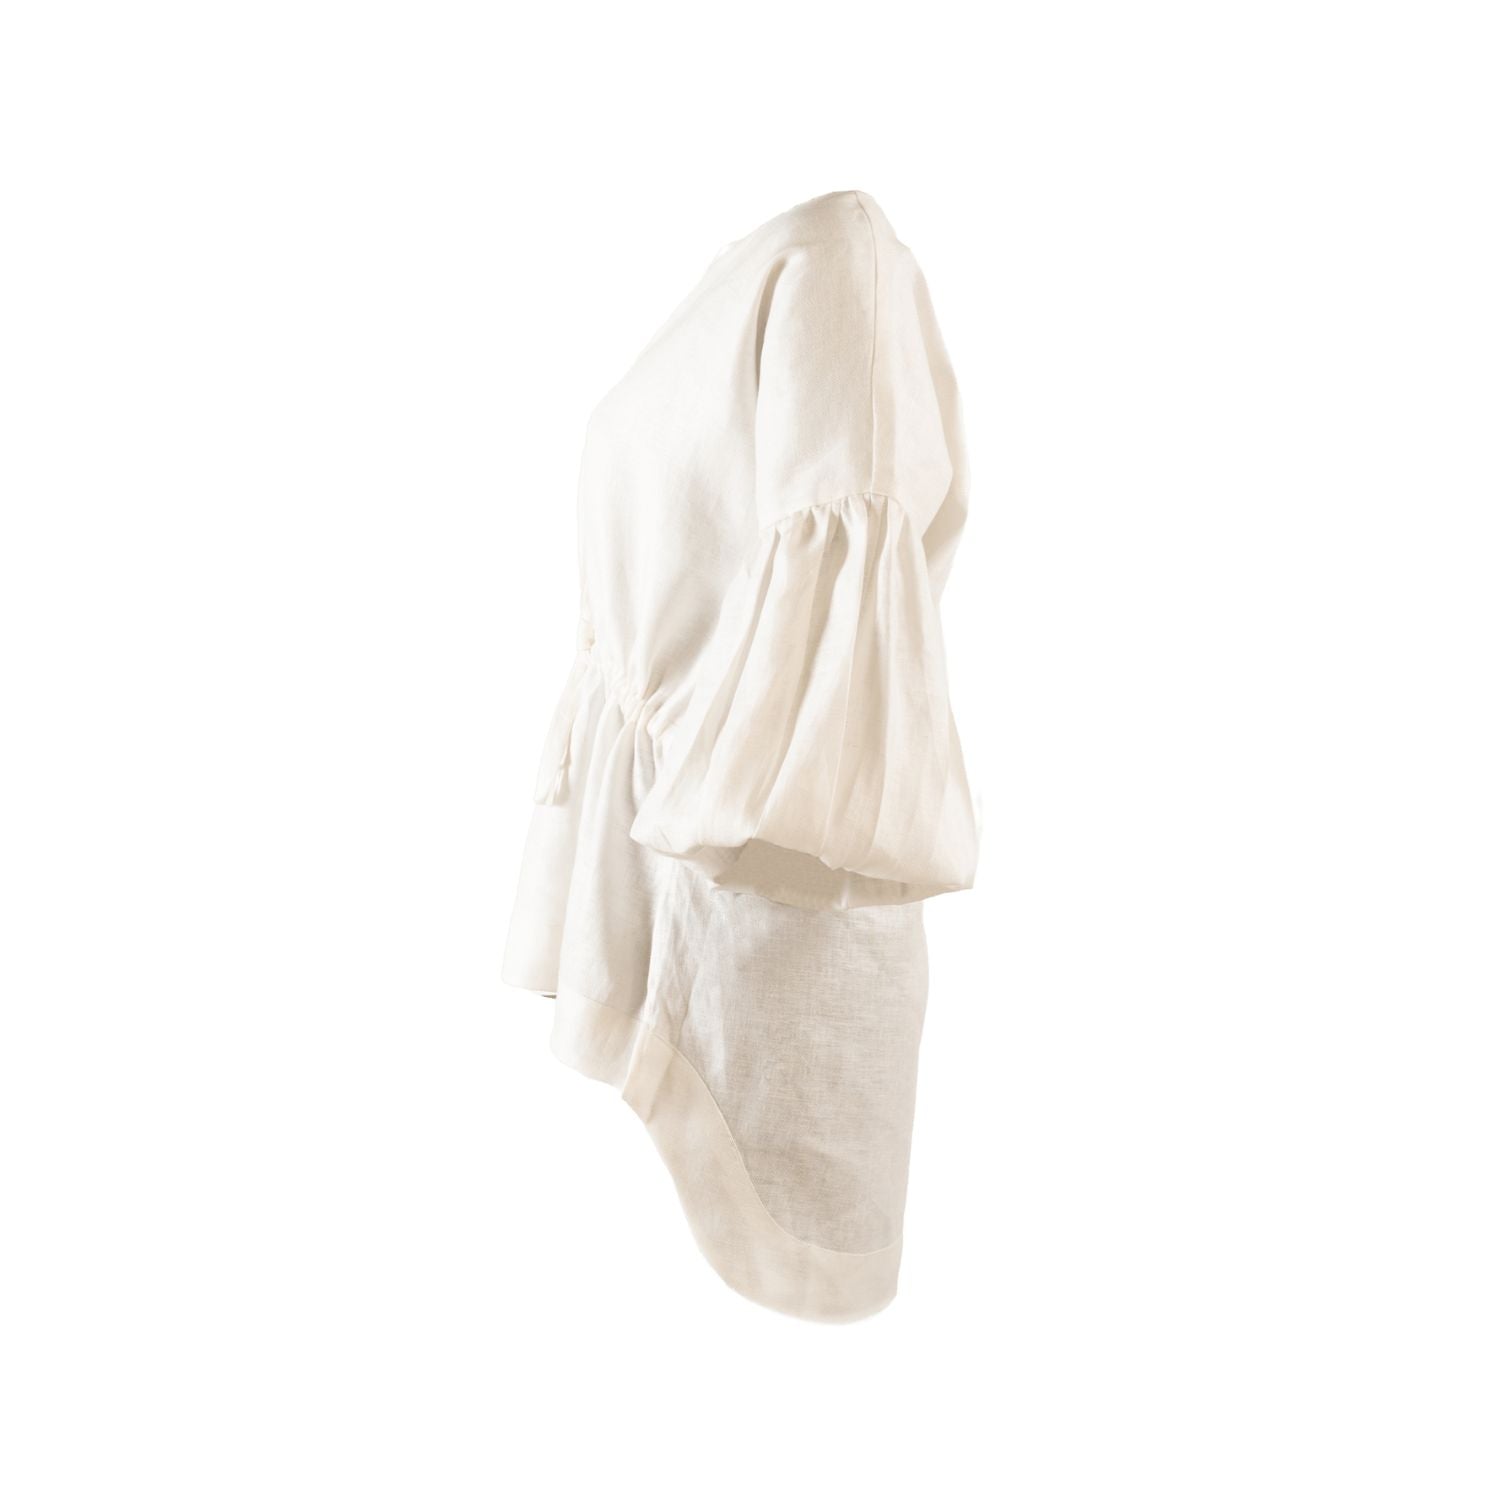 Koh Rong Linen Lounge Top in White